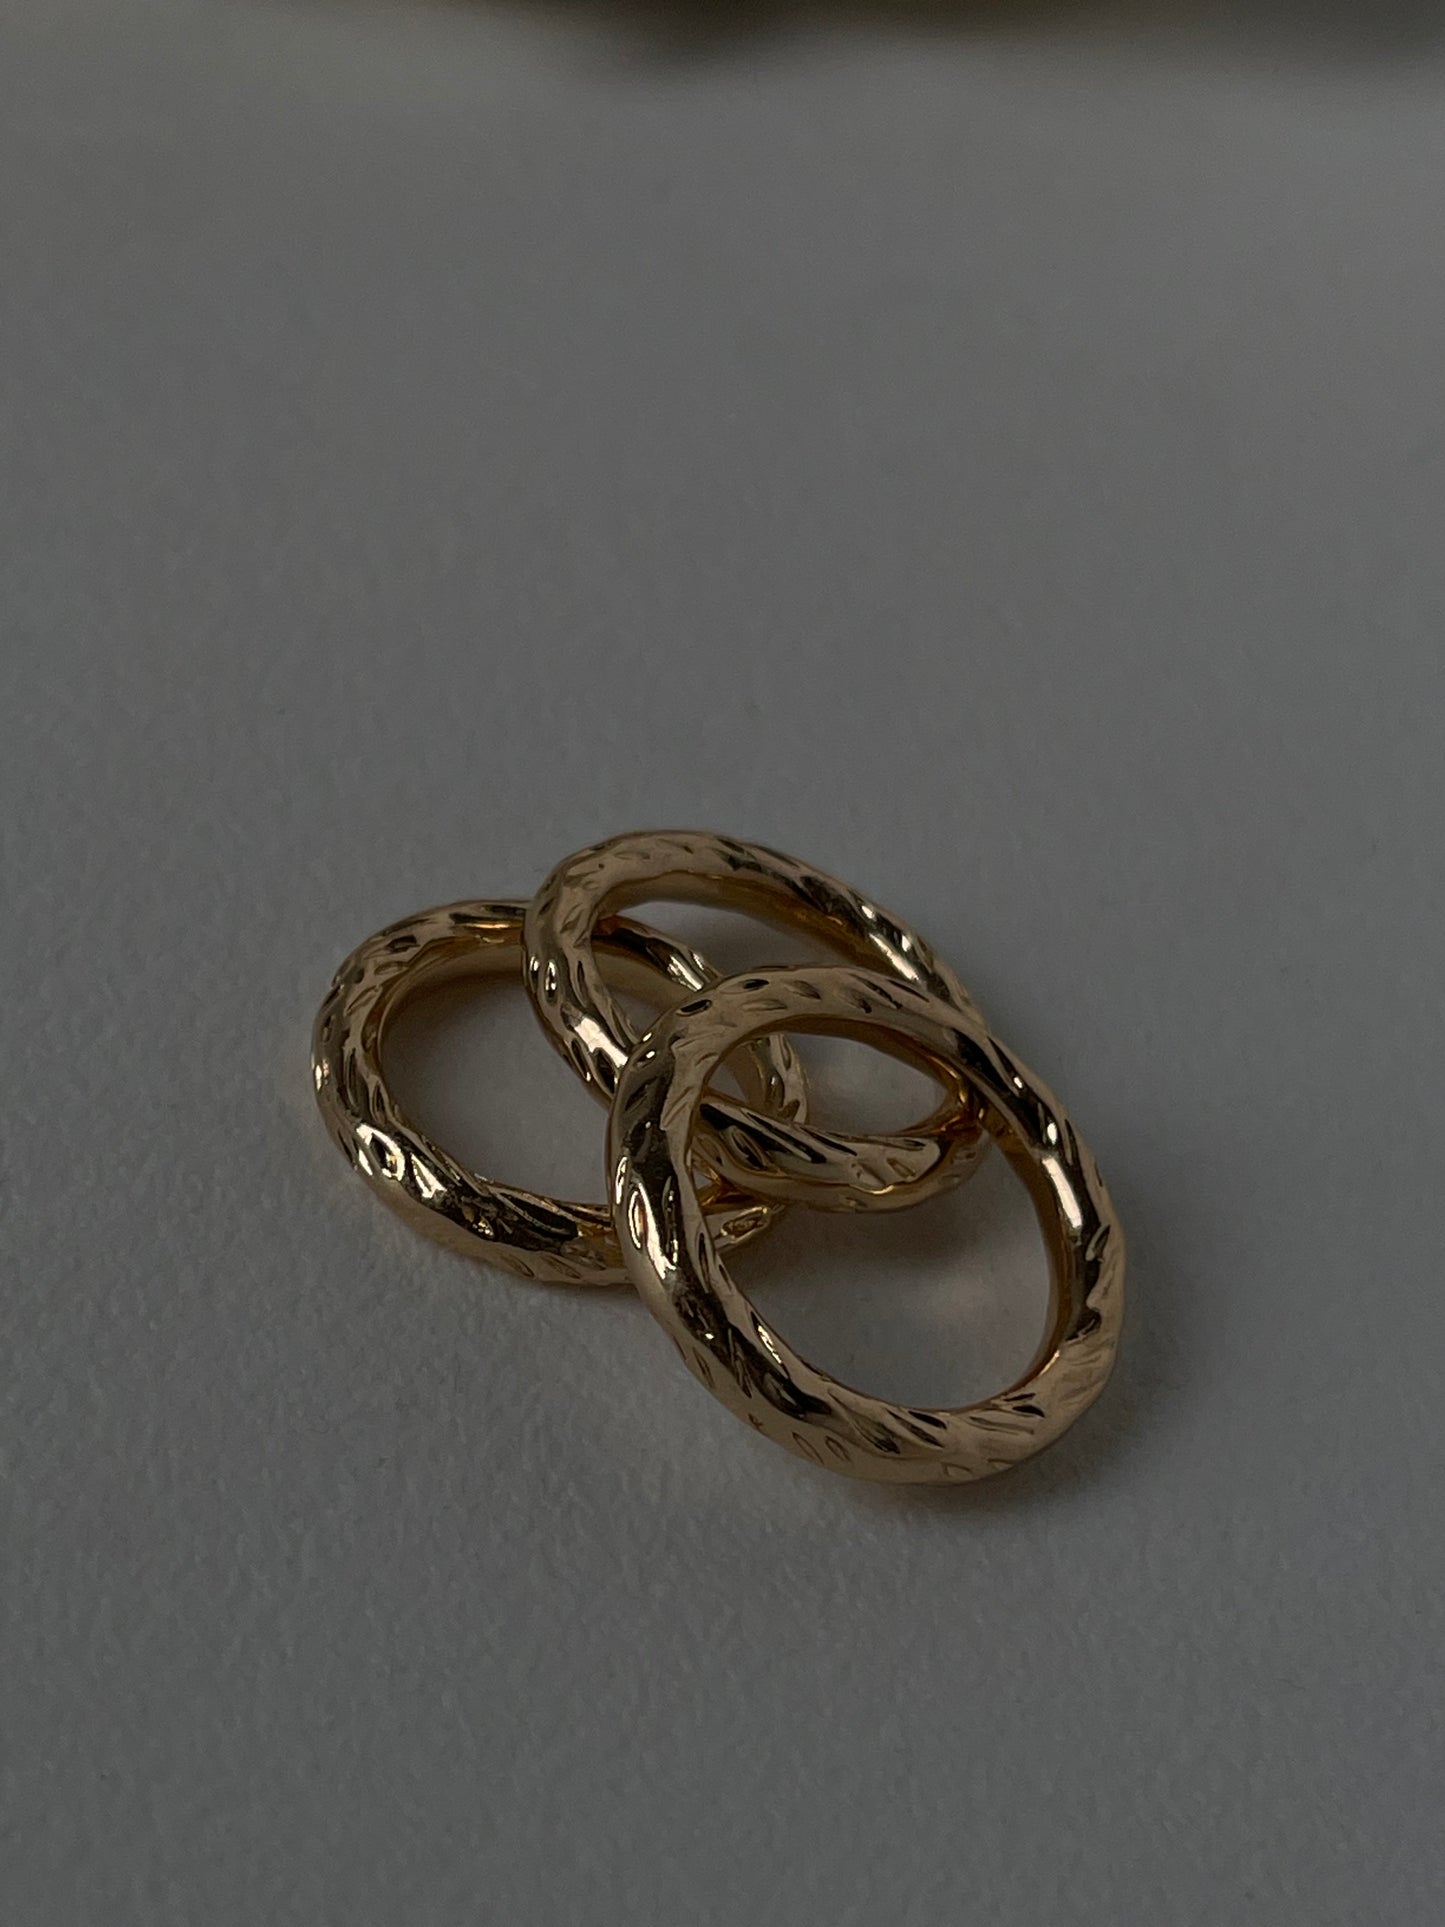 Charlie ￼Organic Etched Ring Set In Gold￼